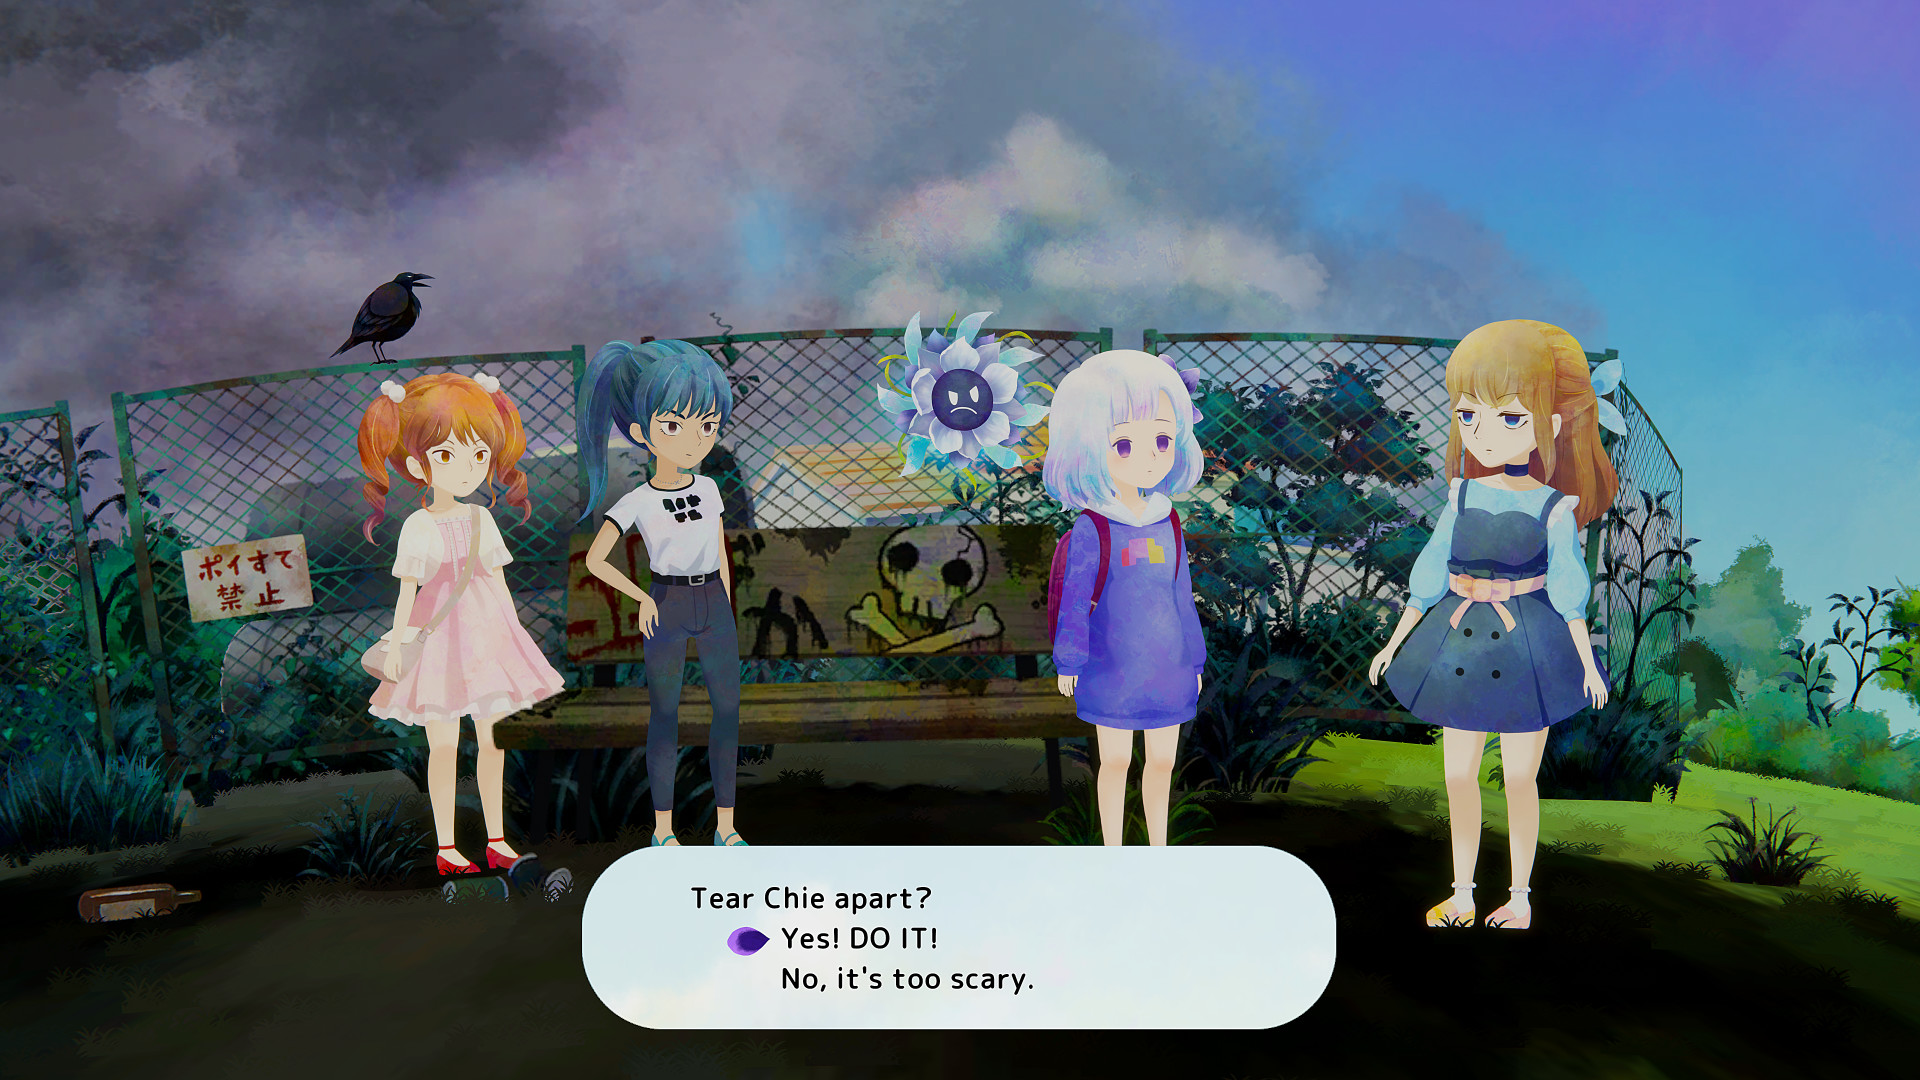 Sumire and Flower being confronted by her "friend" Chie